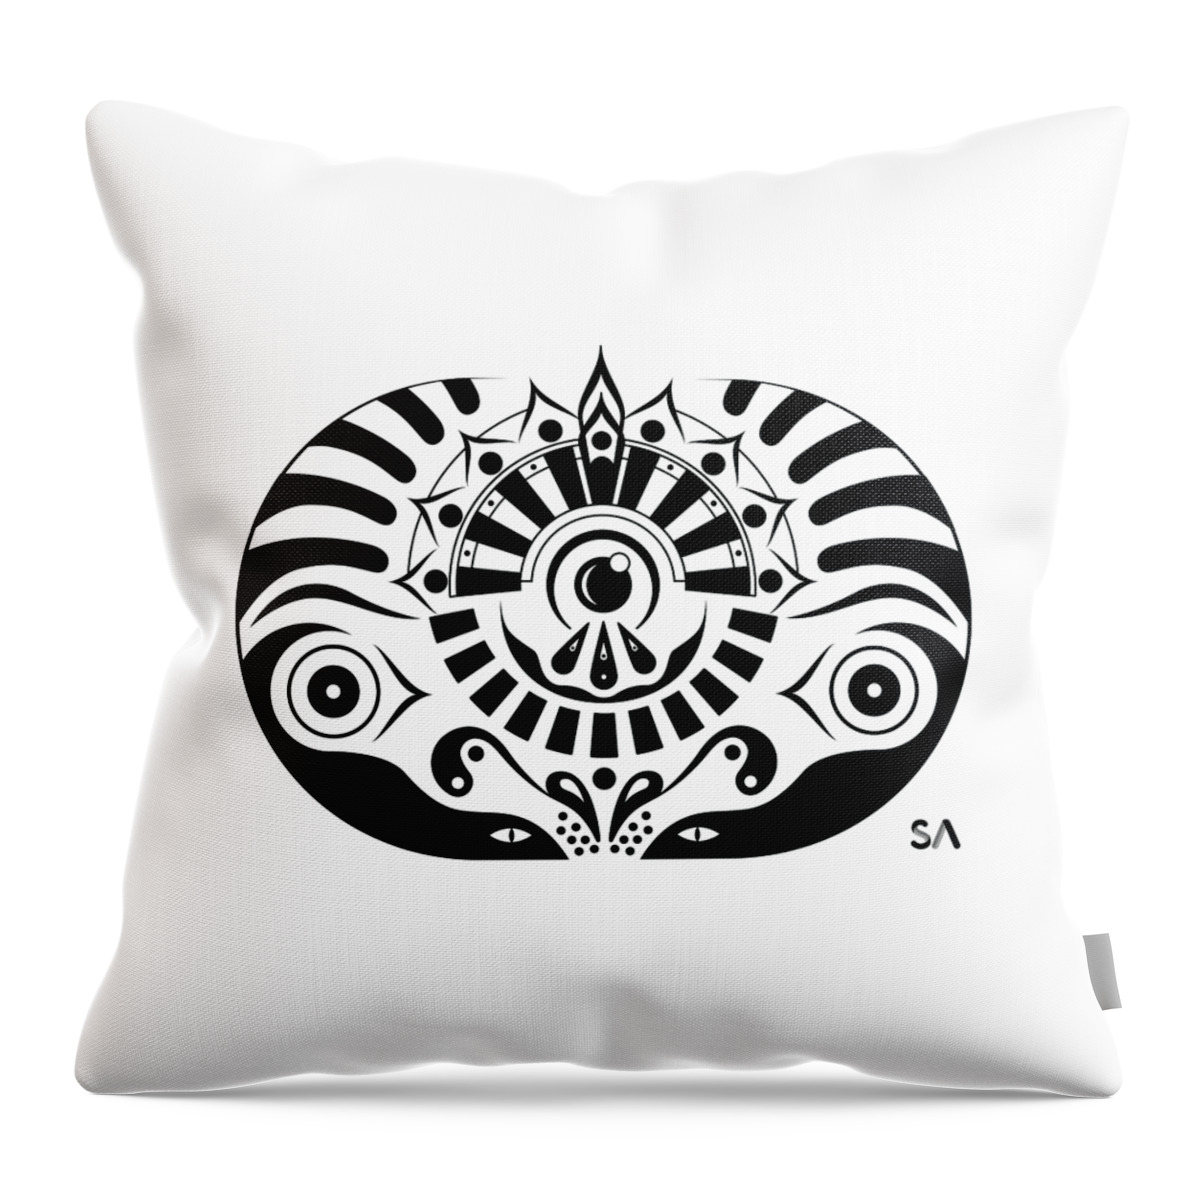 Black And White Throw Pillow featuring the digital art Yoga by Silvio Ary Cavalcante